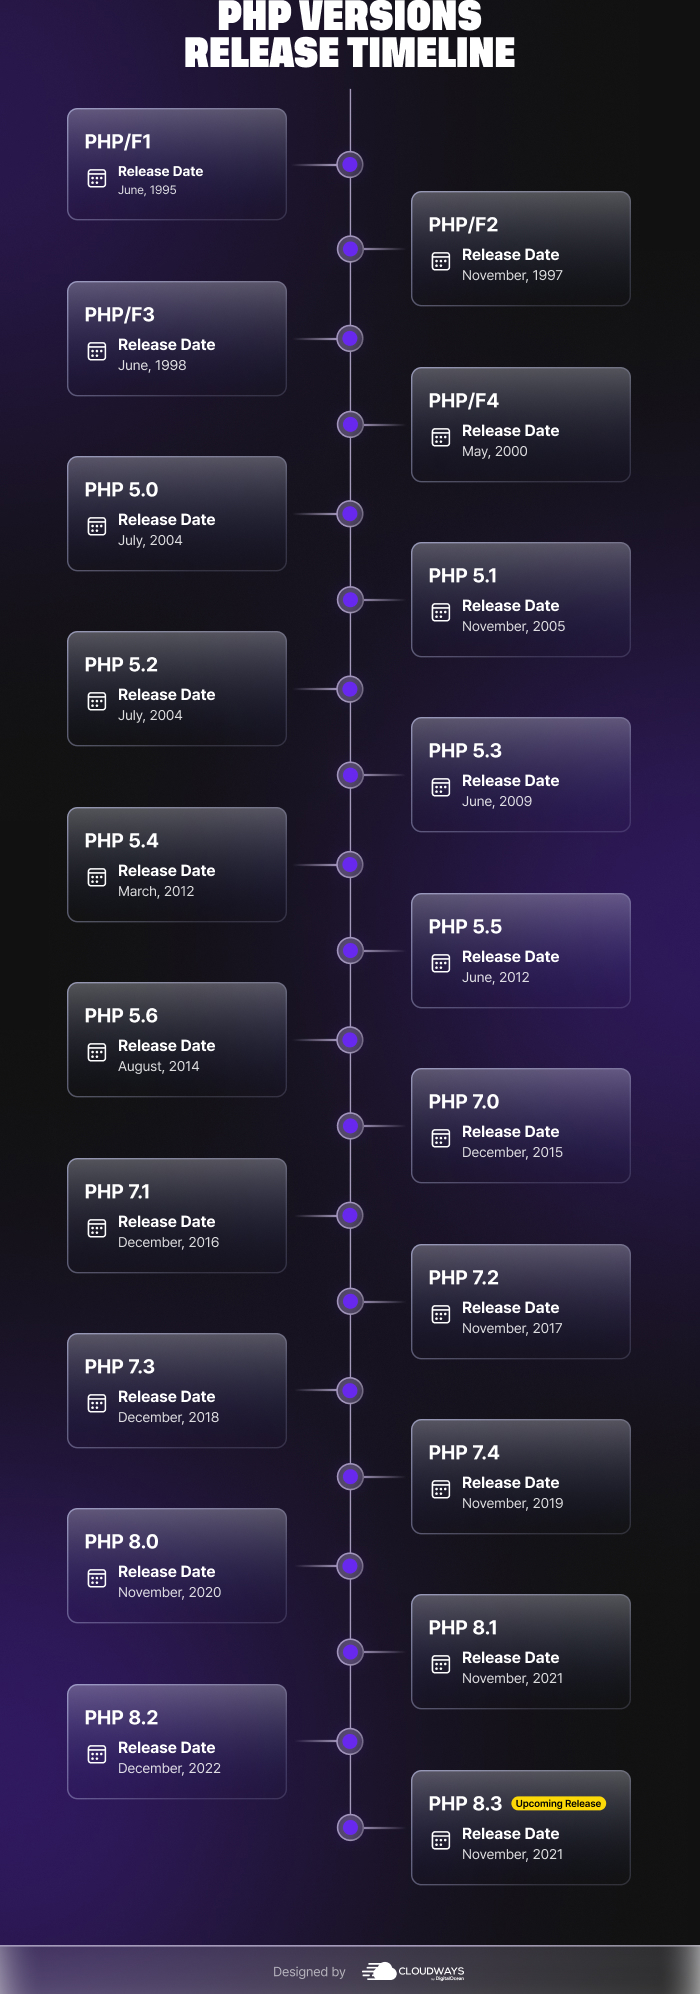 PHP Version History From PHP/FI to PHP 8.x Series